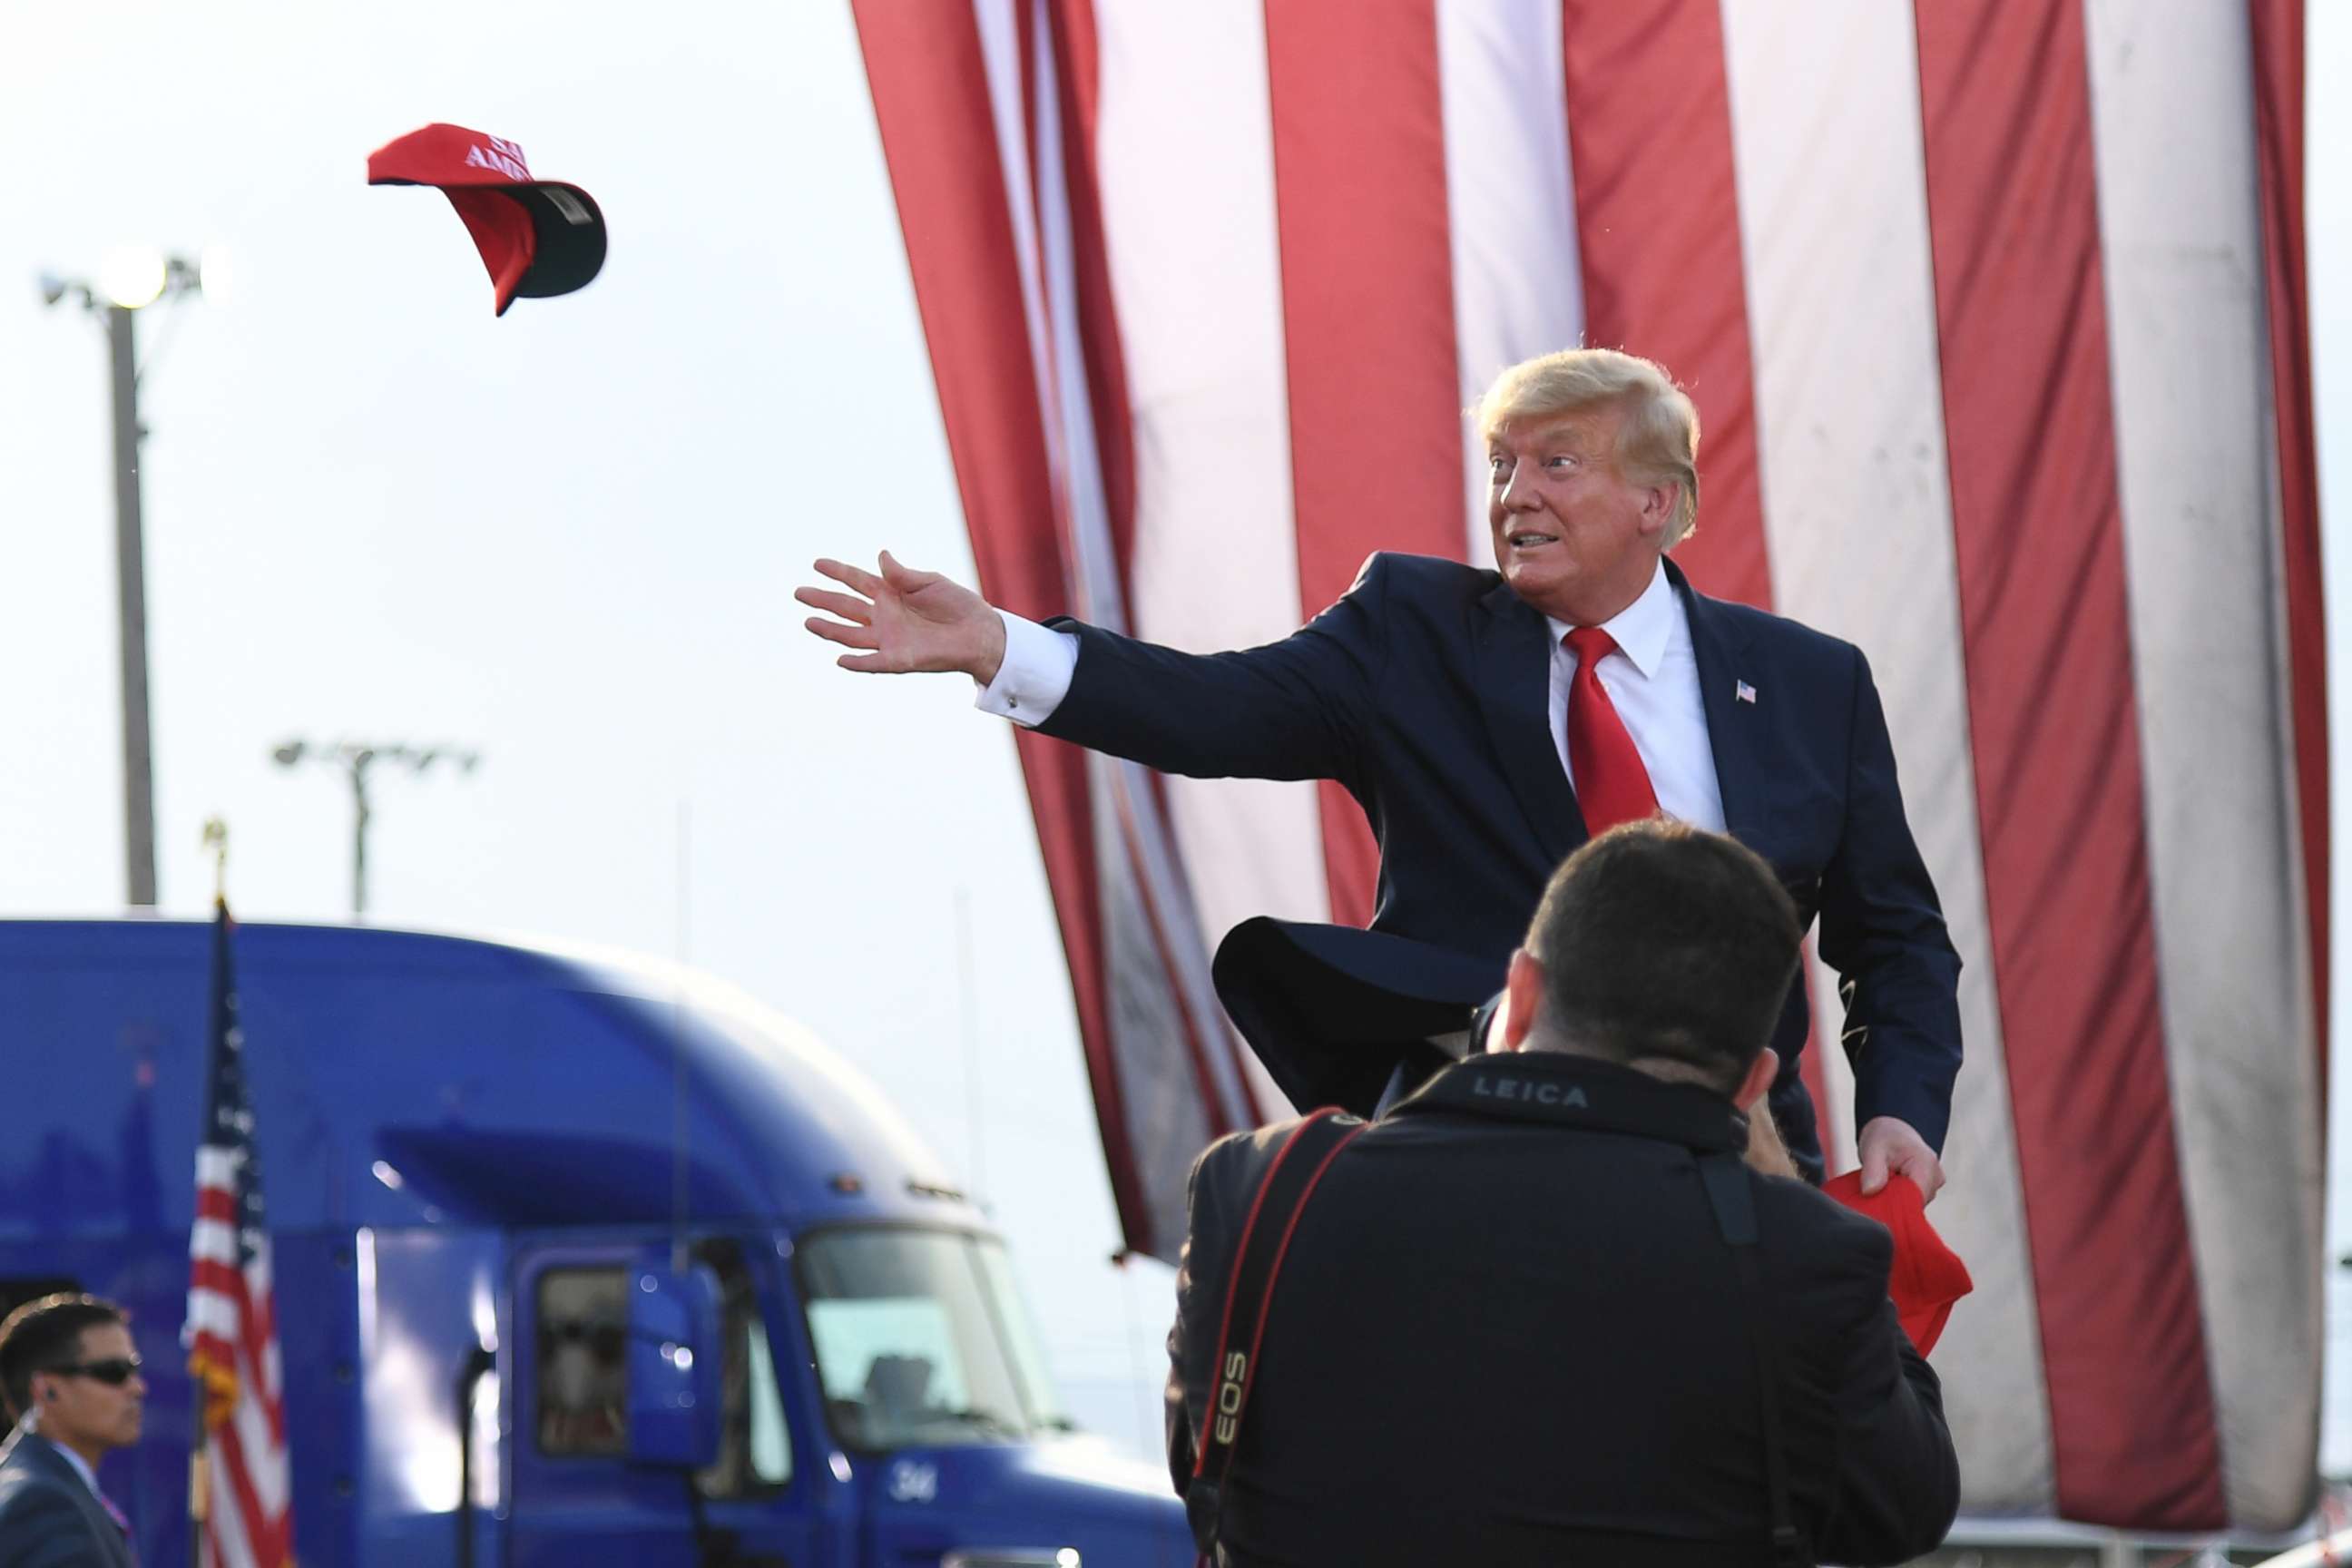 PHOTO: Donald Trump arrives to give remarks during a Save America Rally in  in Mendon, Ill., June 25, 2022.